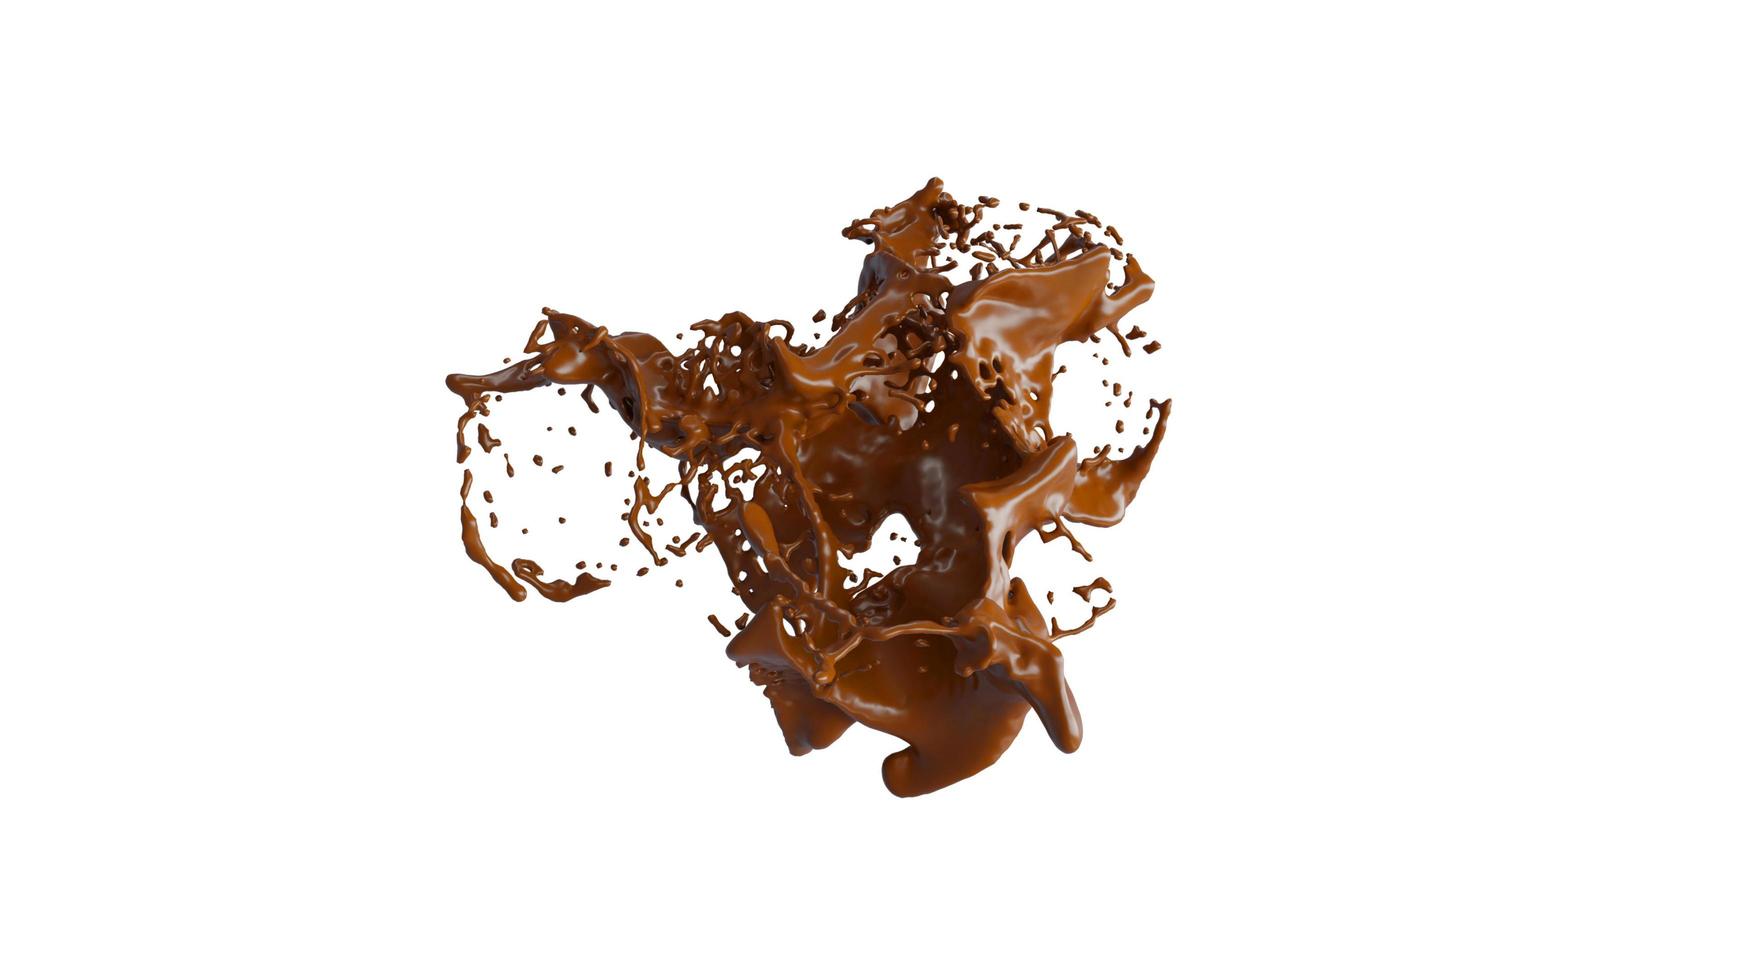 Chocolate Splash with droplets 3d rendering. 3d illustration. photo